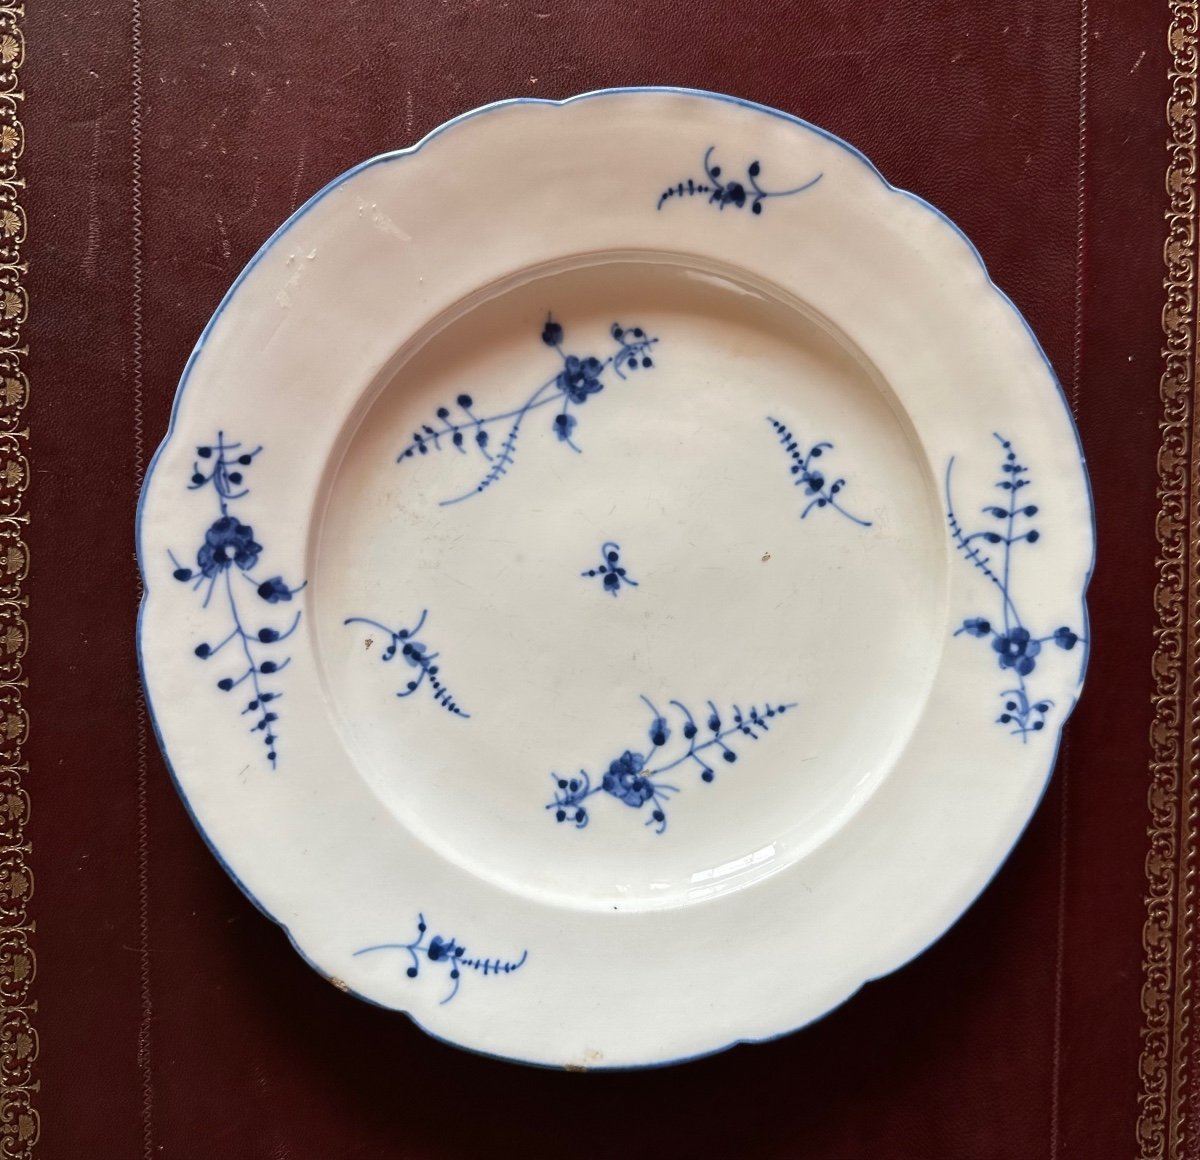 Soft Chantilly Porcelain Plate. From The 18th Century.